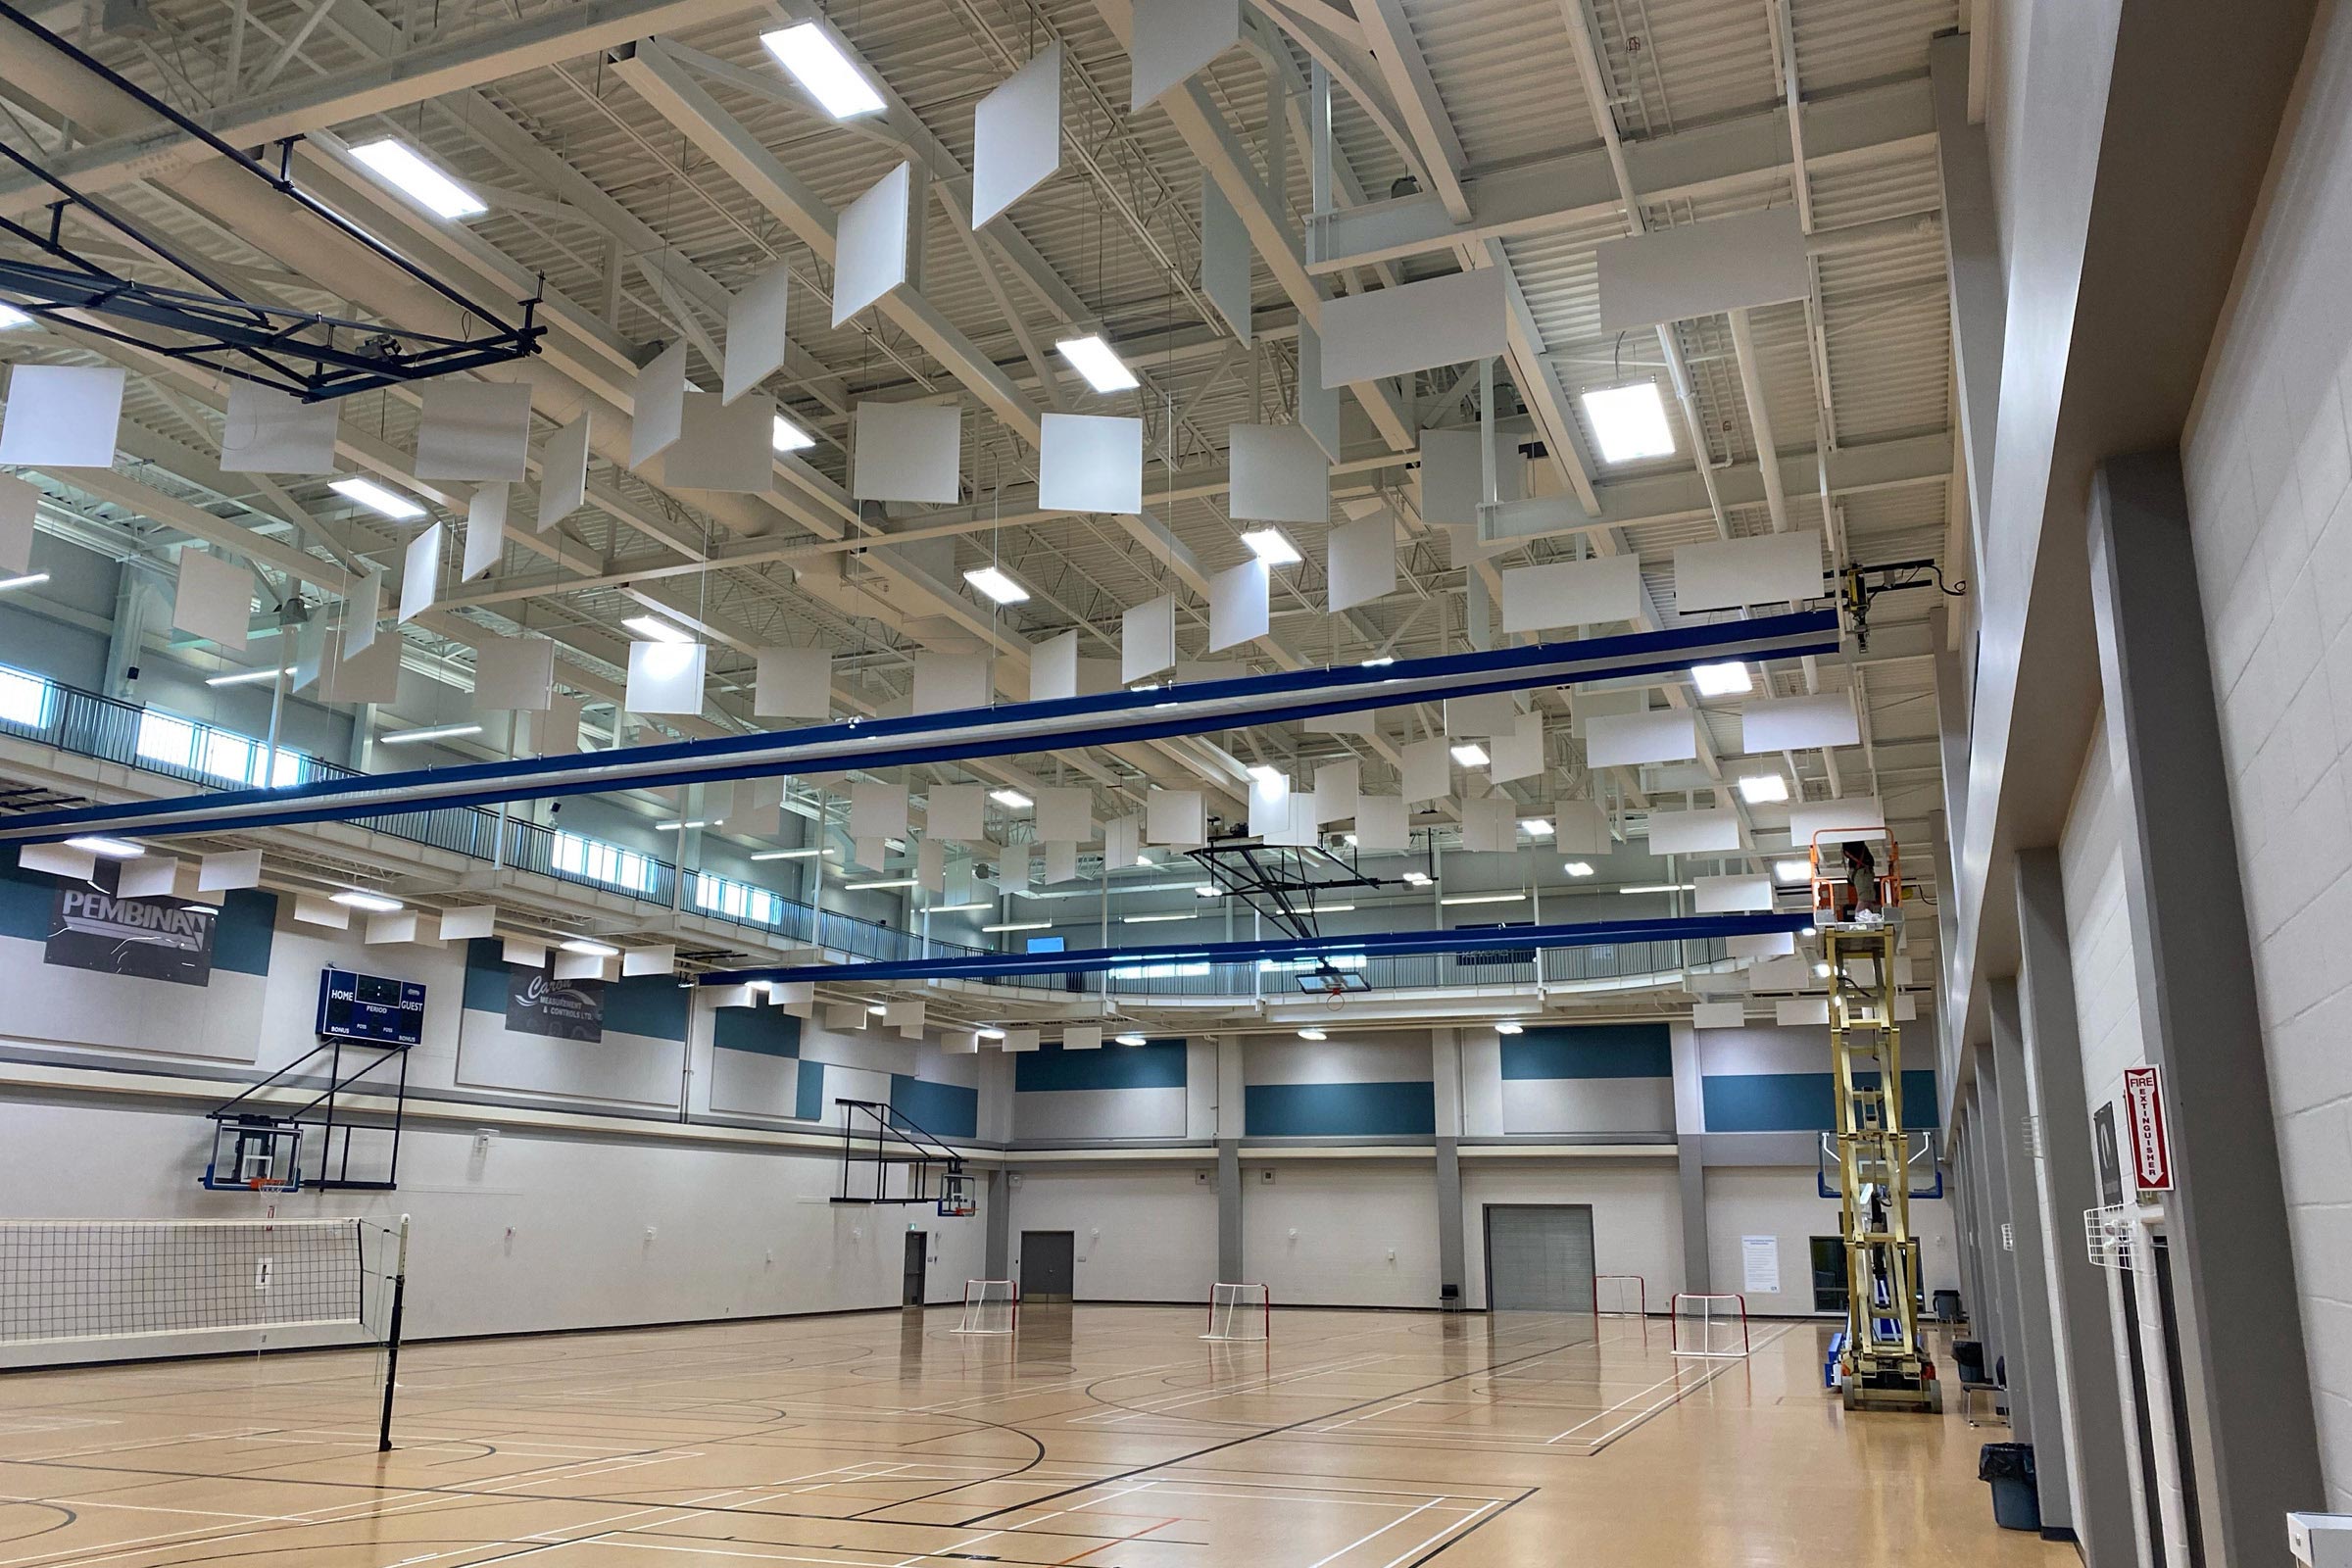 Primacoustic Baffles in a sports hall